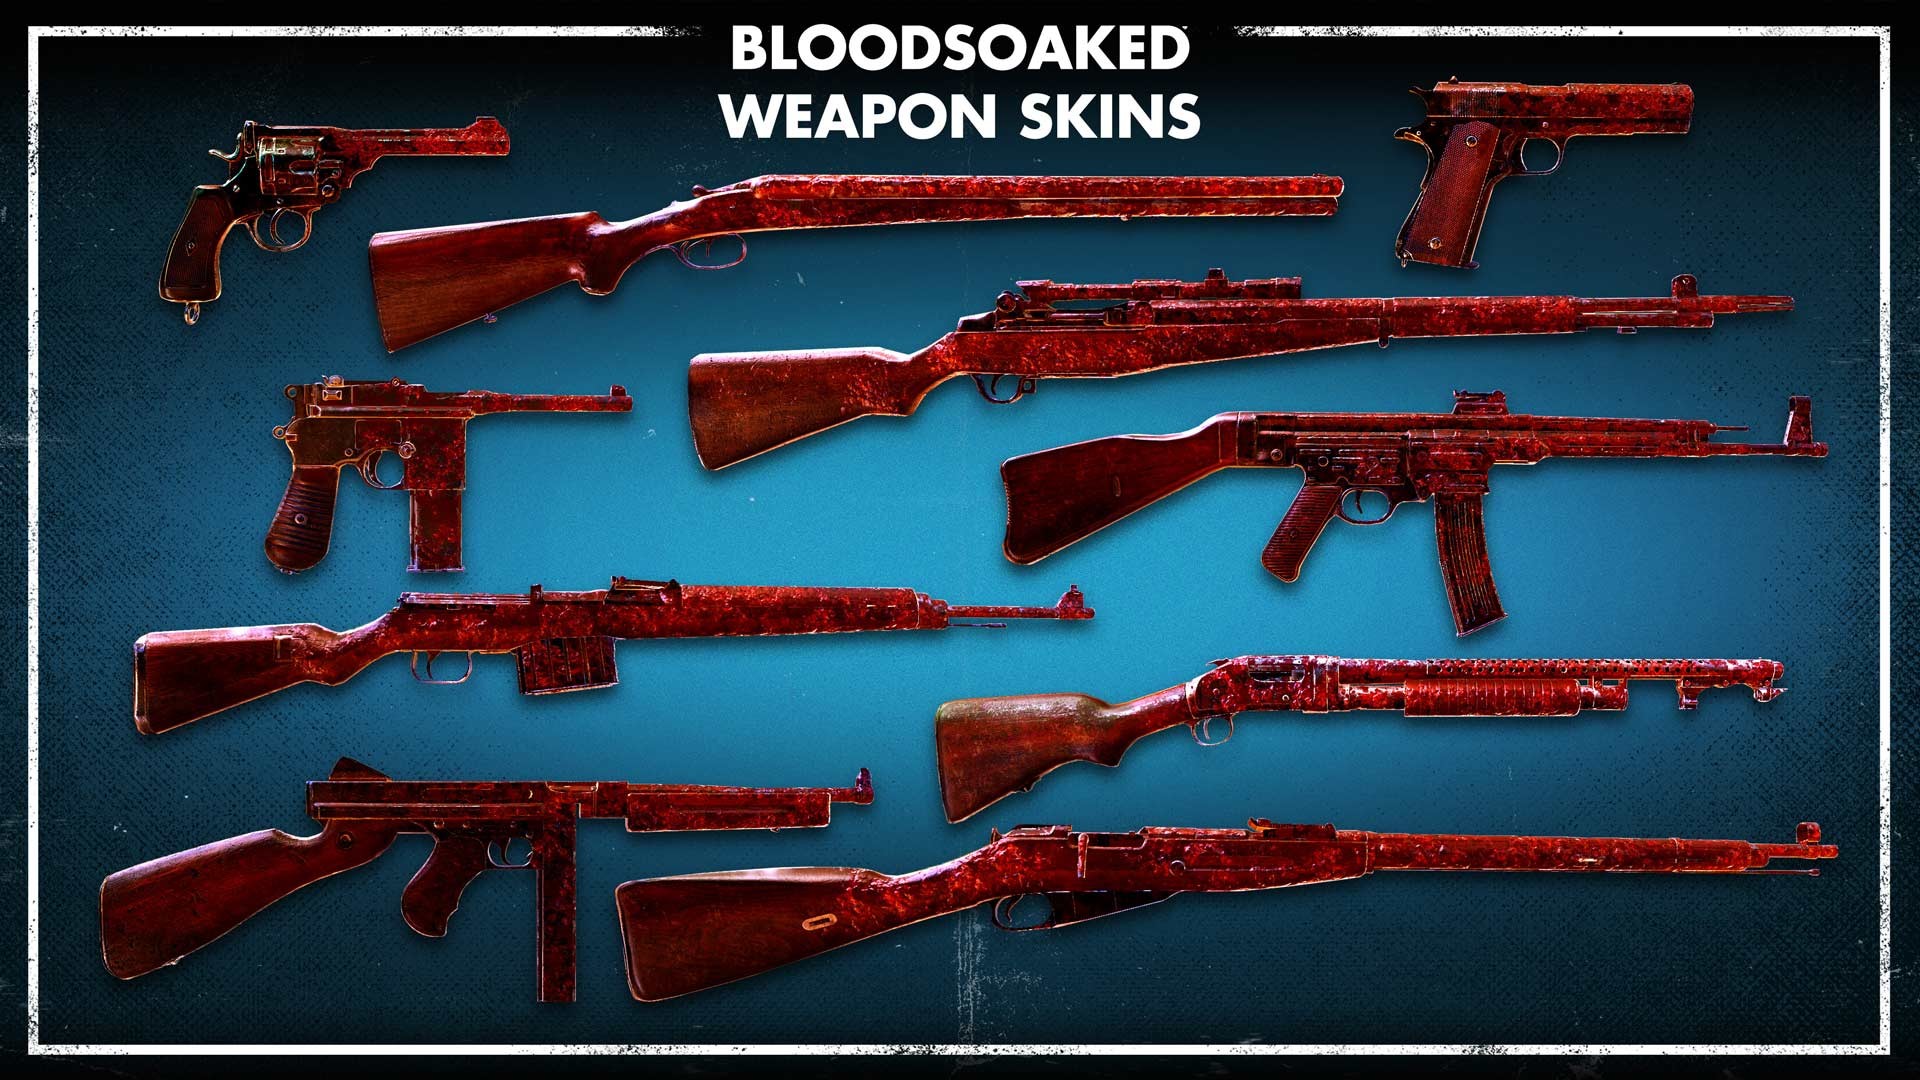 Zombie Army 4: Bloodsoaked Weapon Skins Featured Screenshot #1